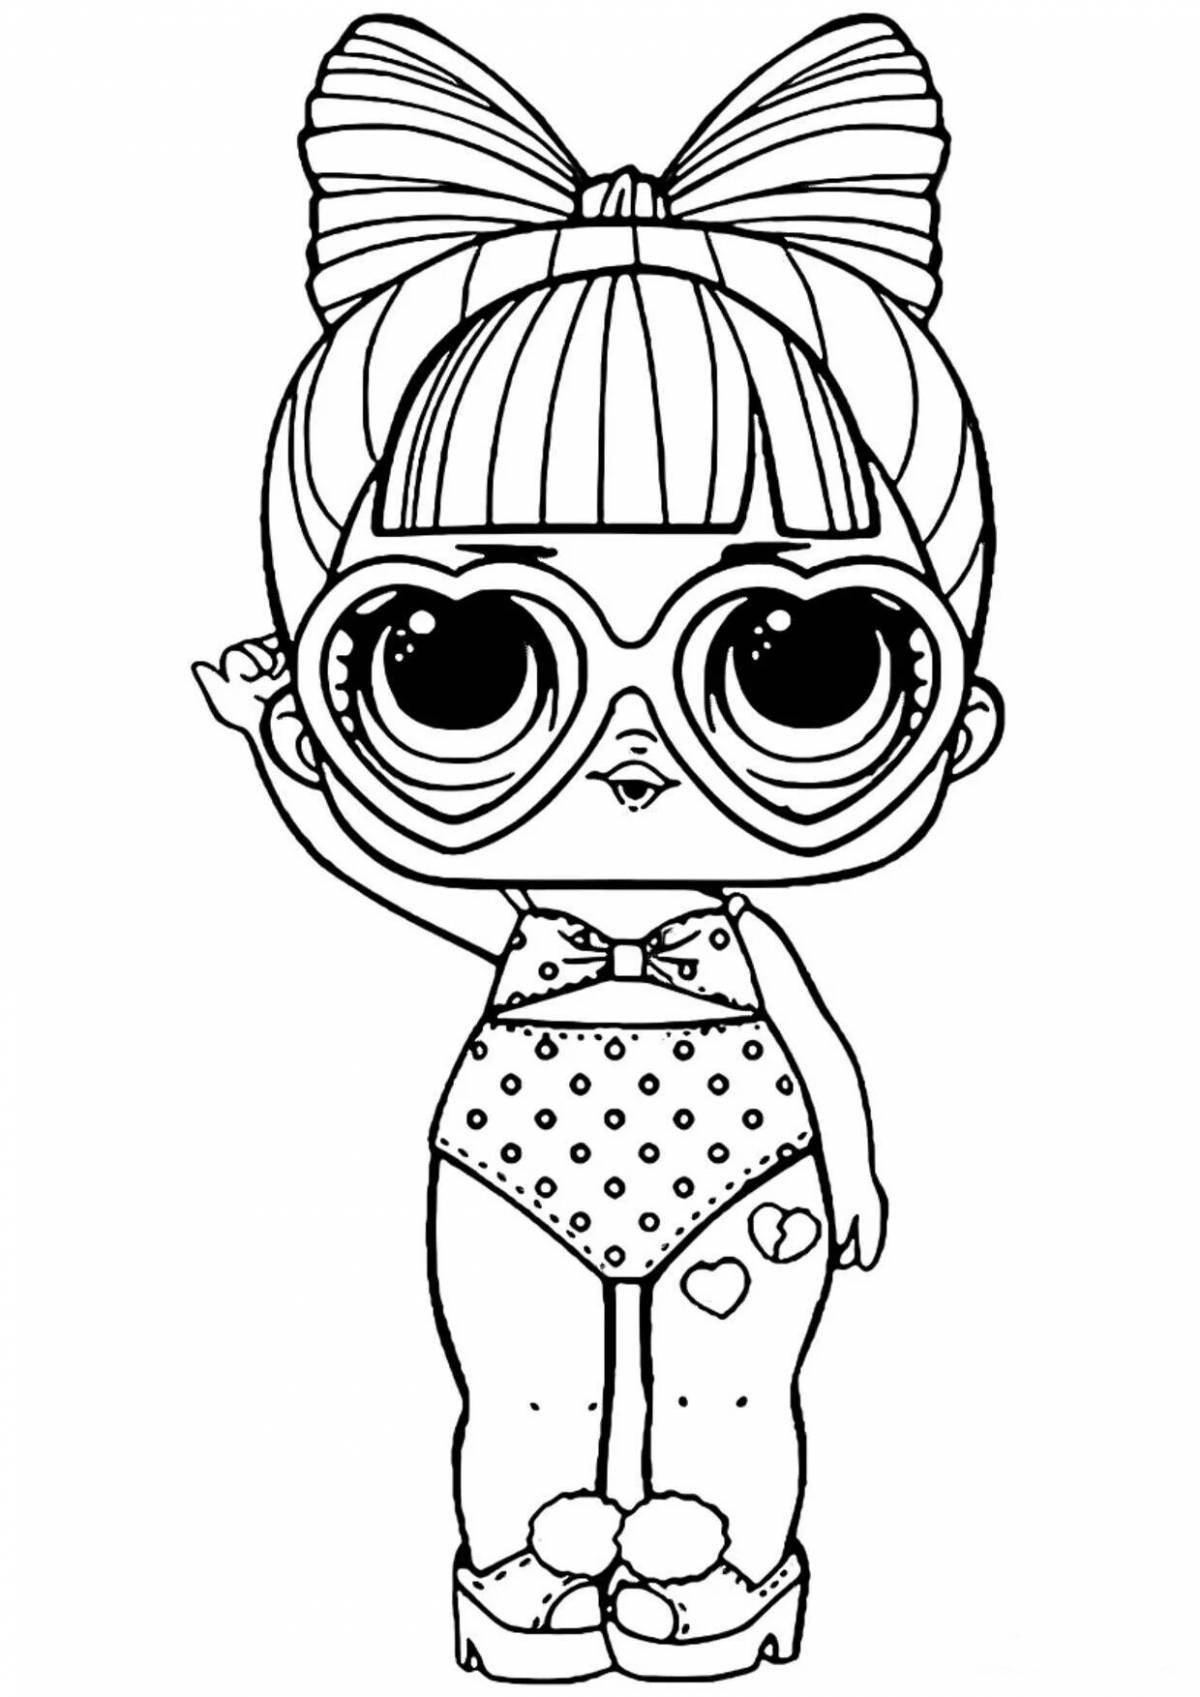 Fine coloring book for girls, lola doll